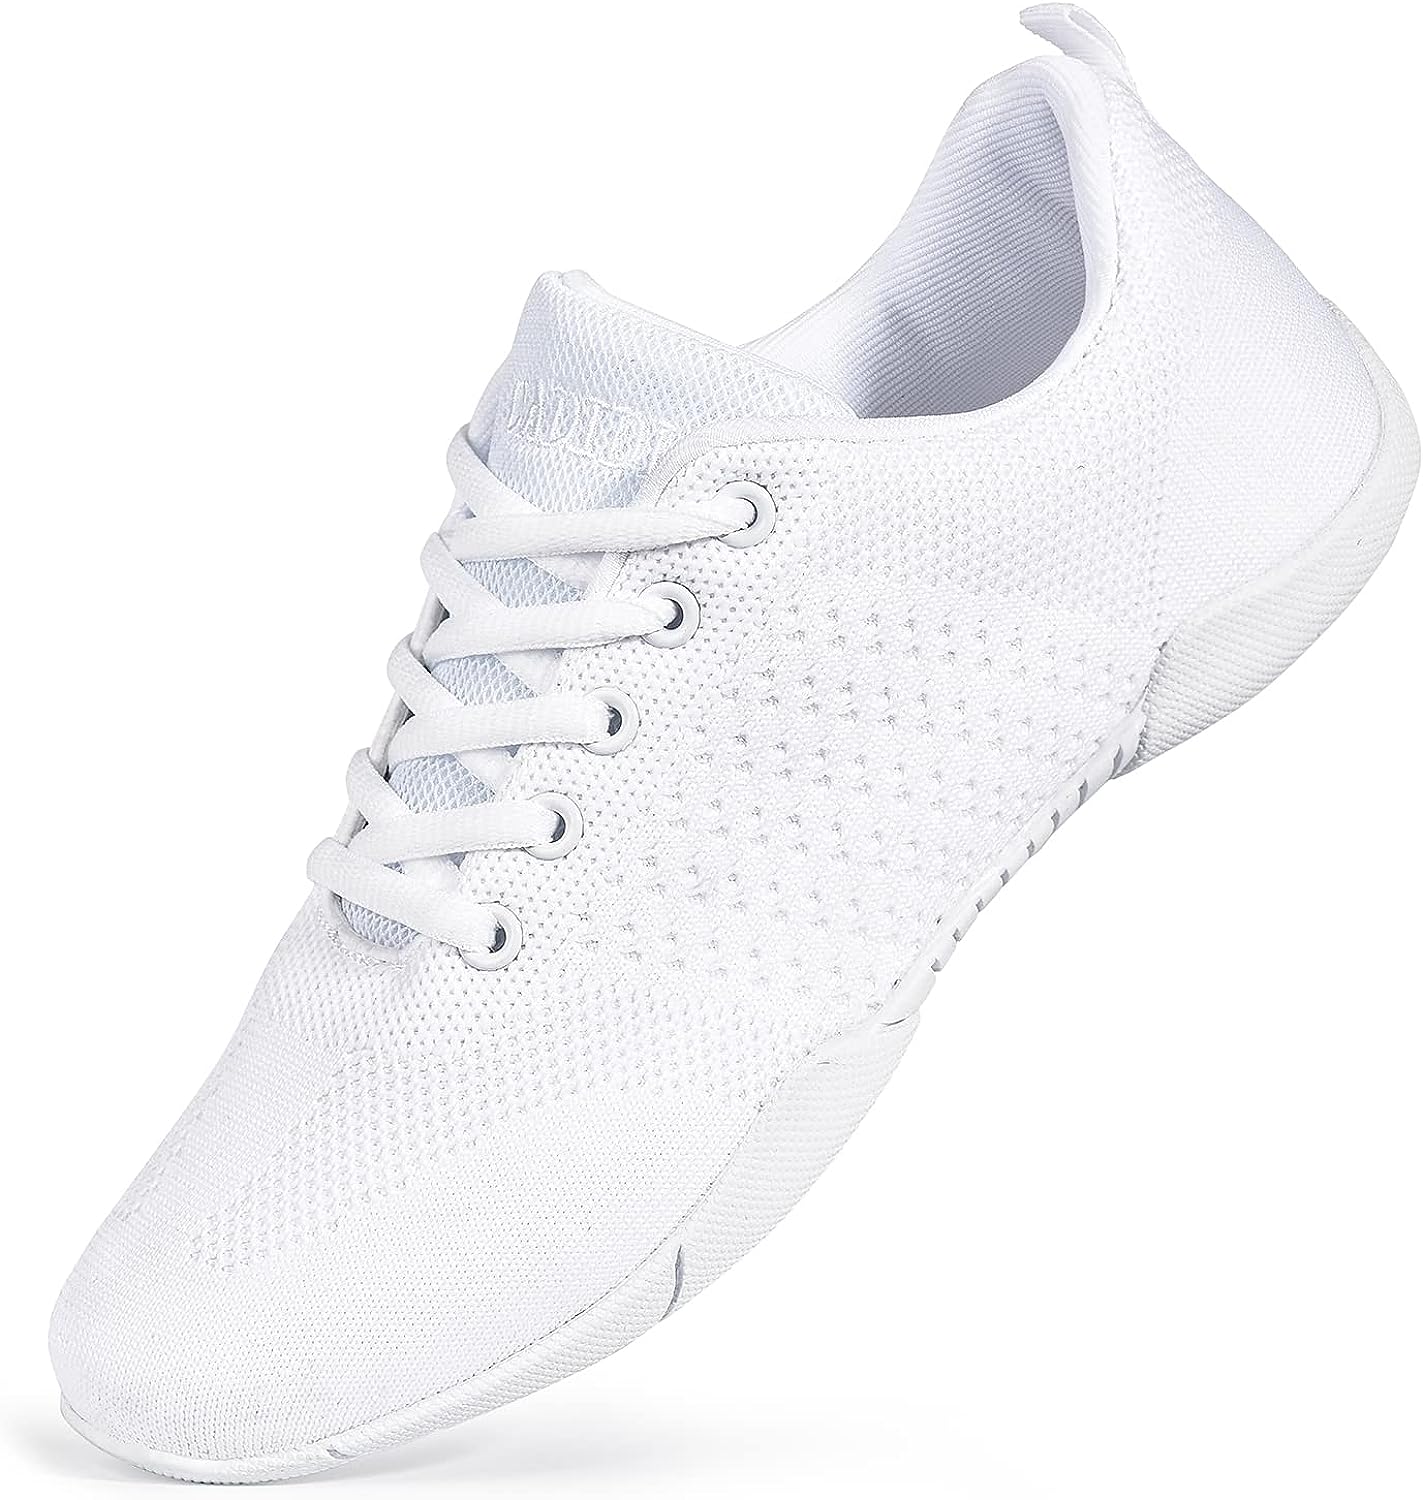 CADIDL Cheer Shoes Women White Cheerleading Dance Shoes